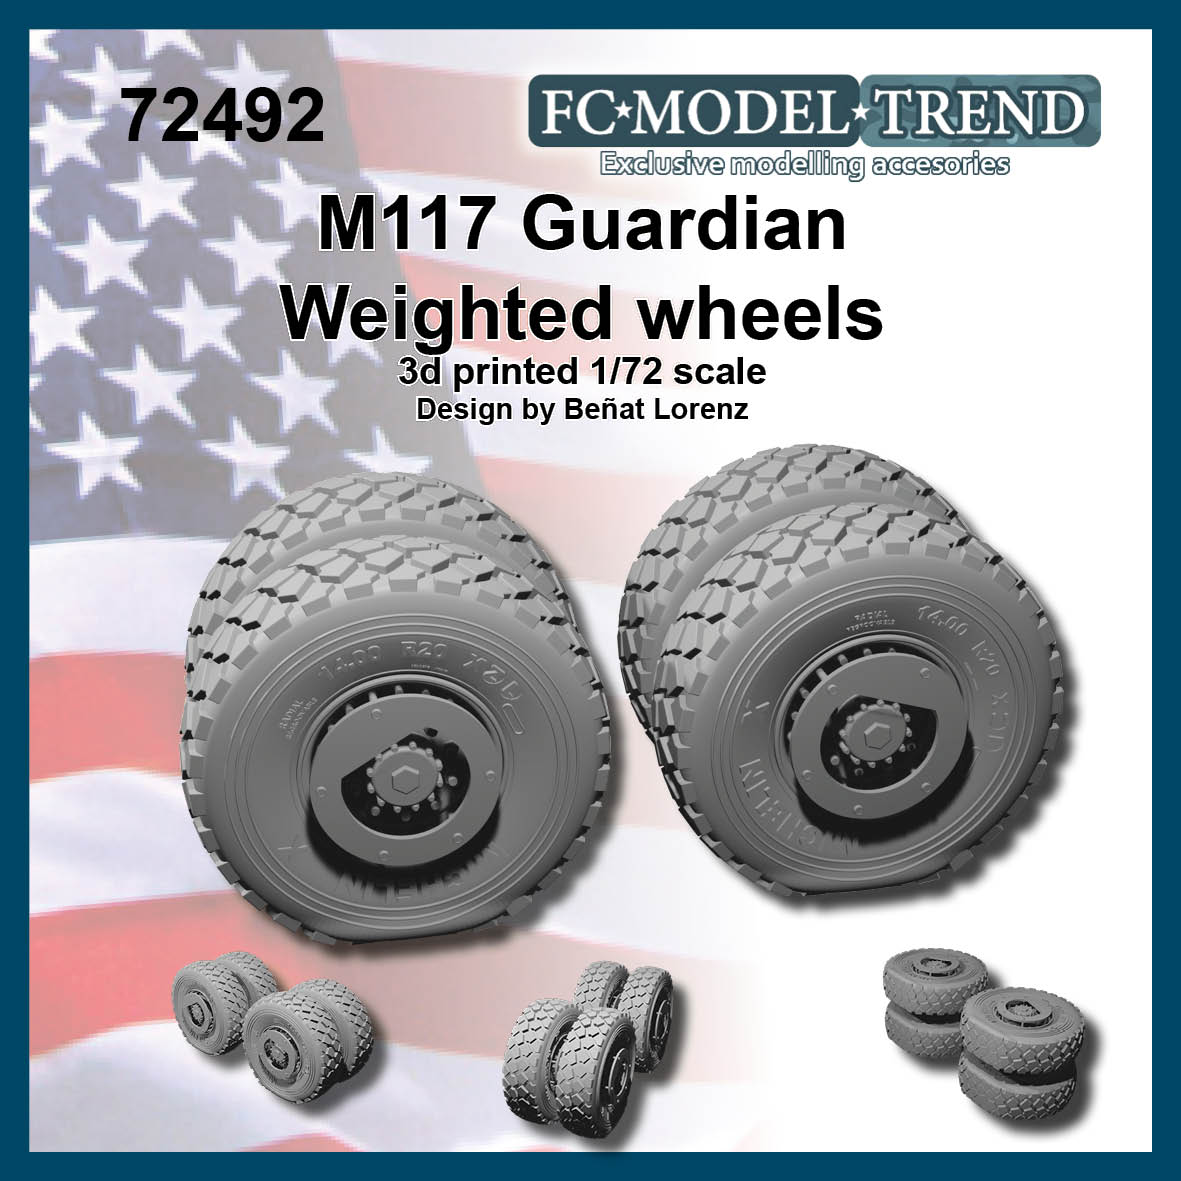 M1117 Guardian weighted wheels